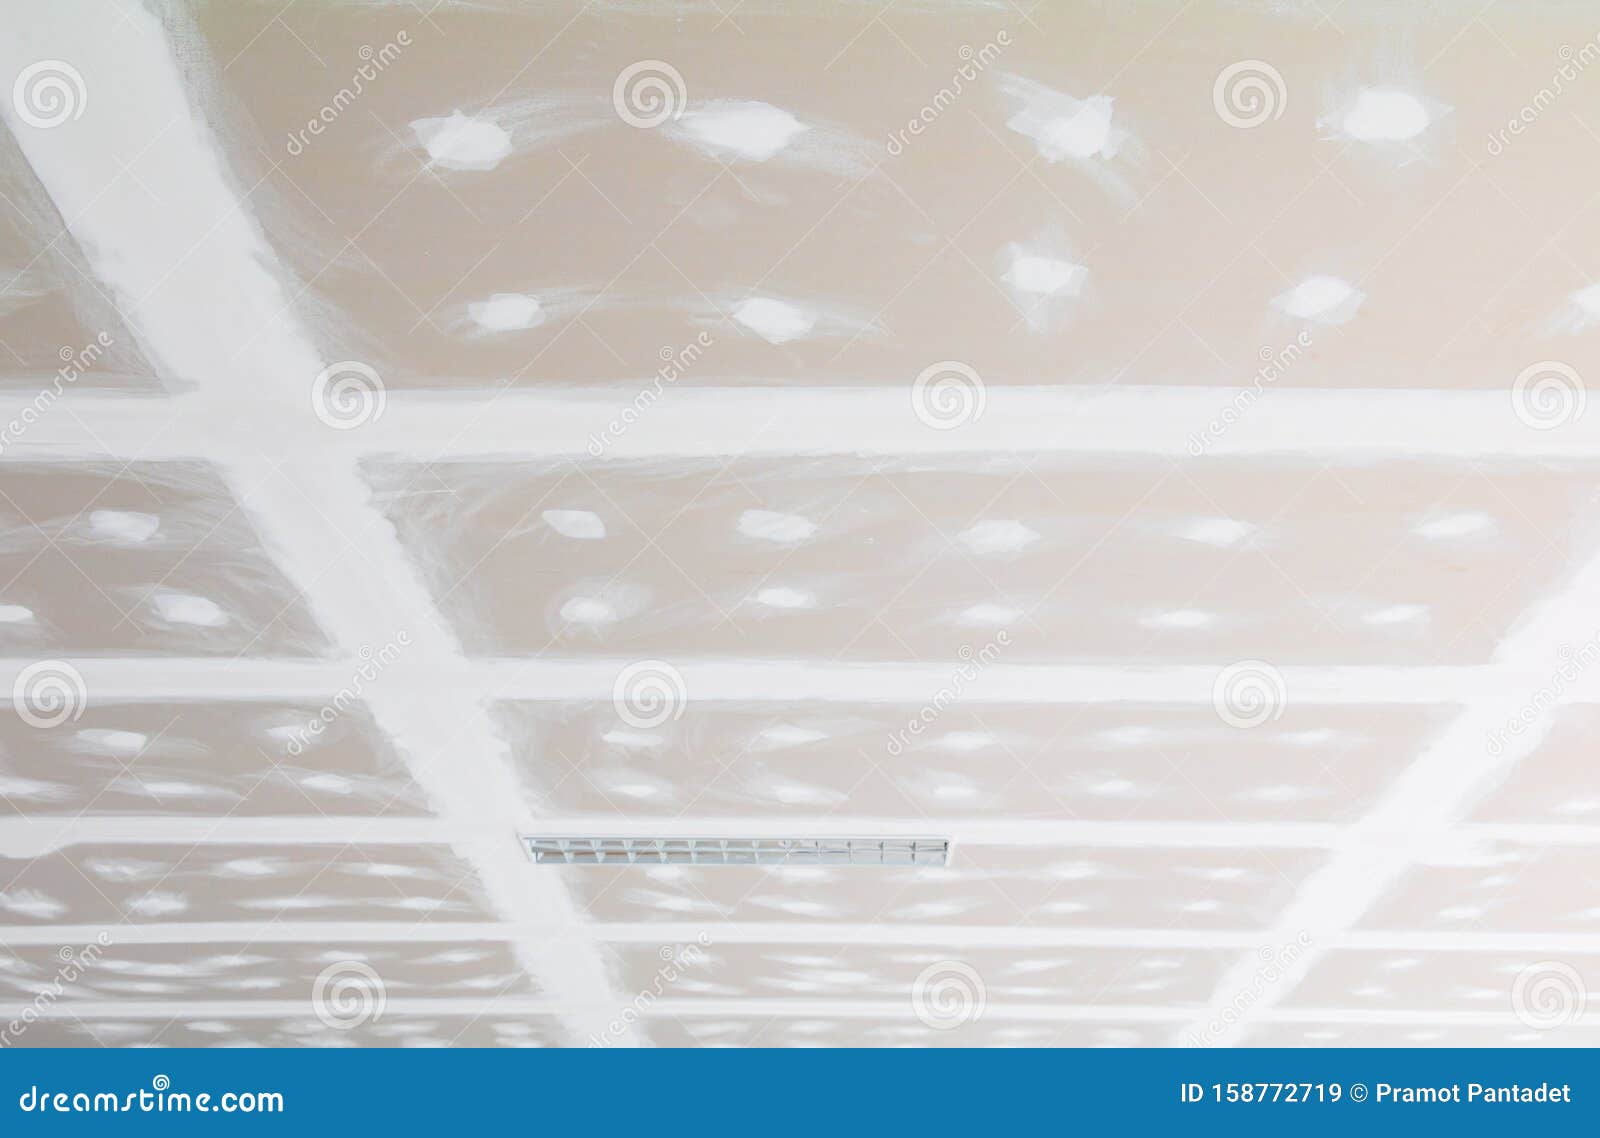 Gypsum Board Ceiling Structure And Plaster Mortar Wall